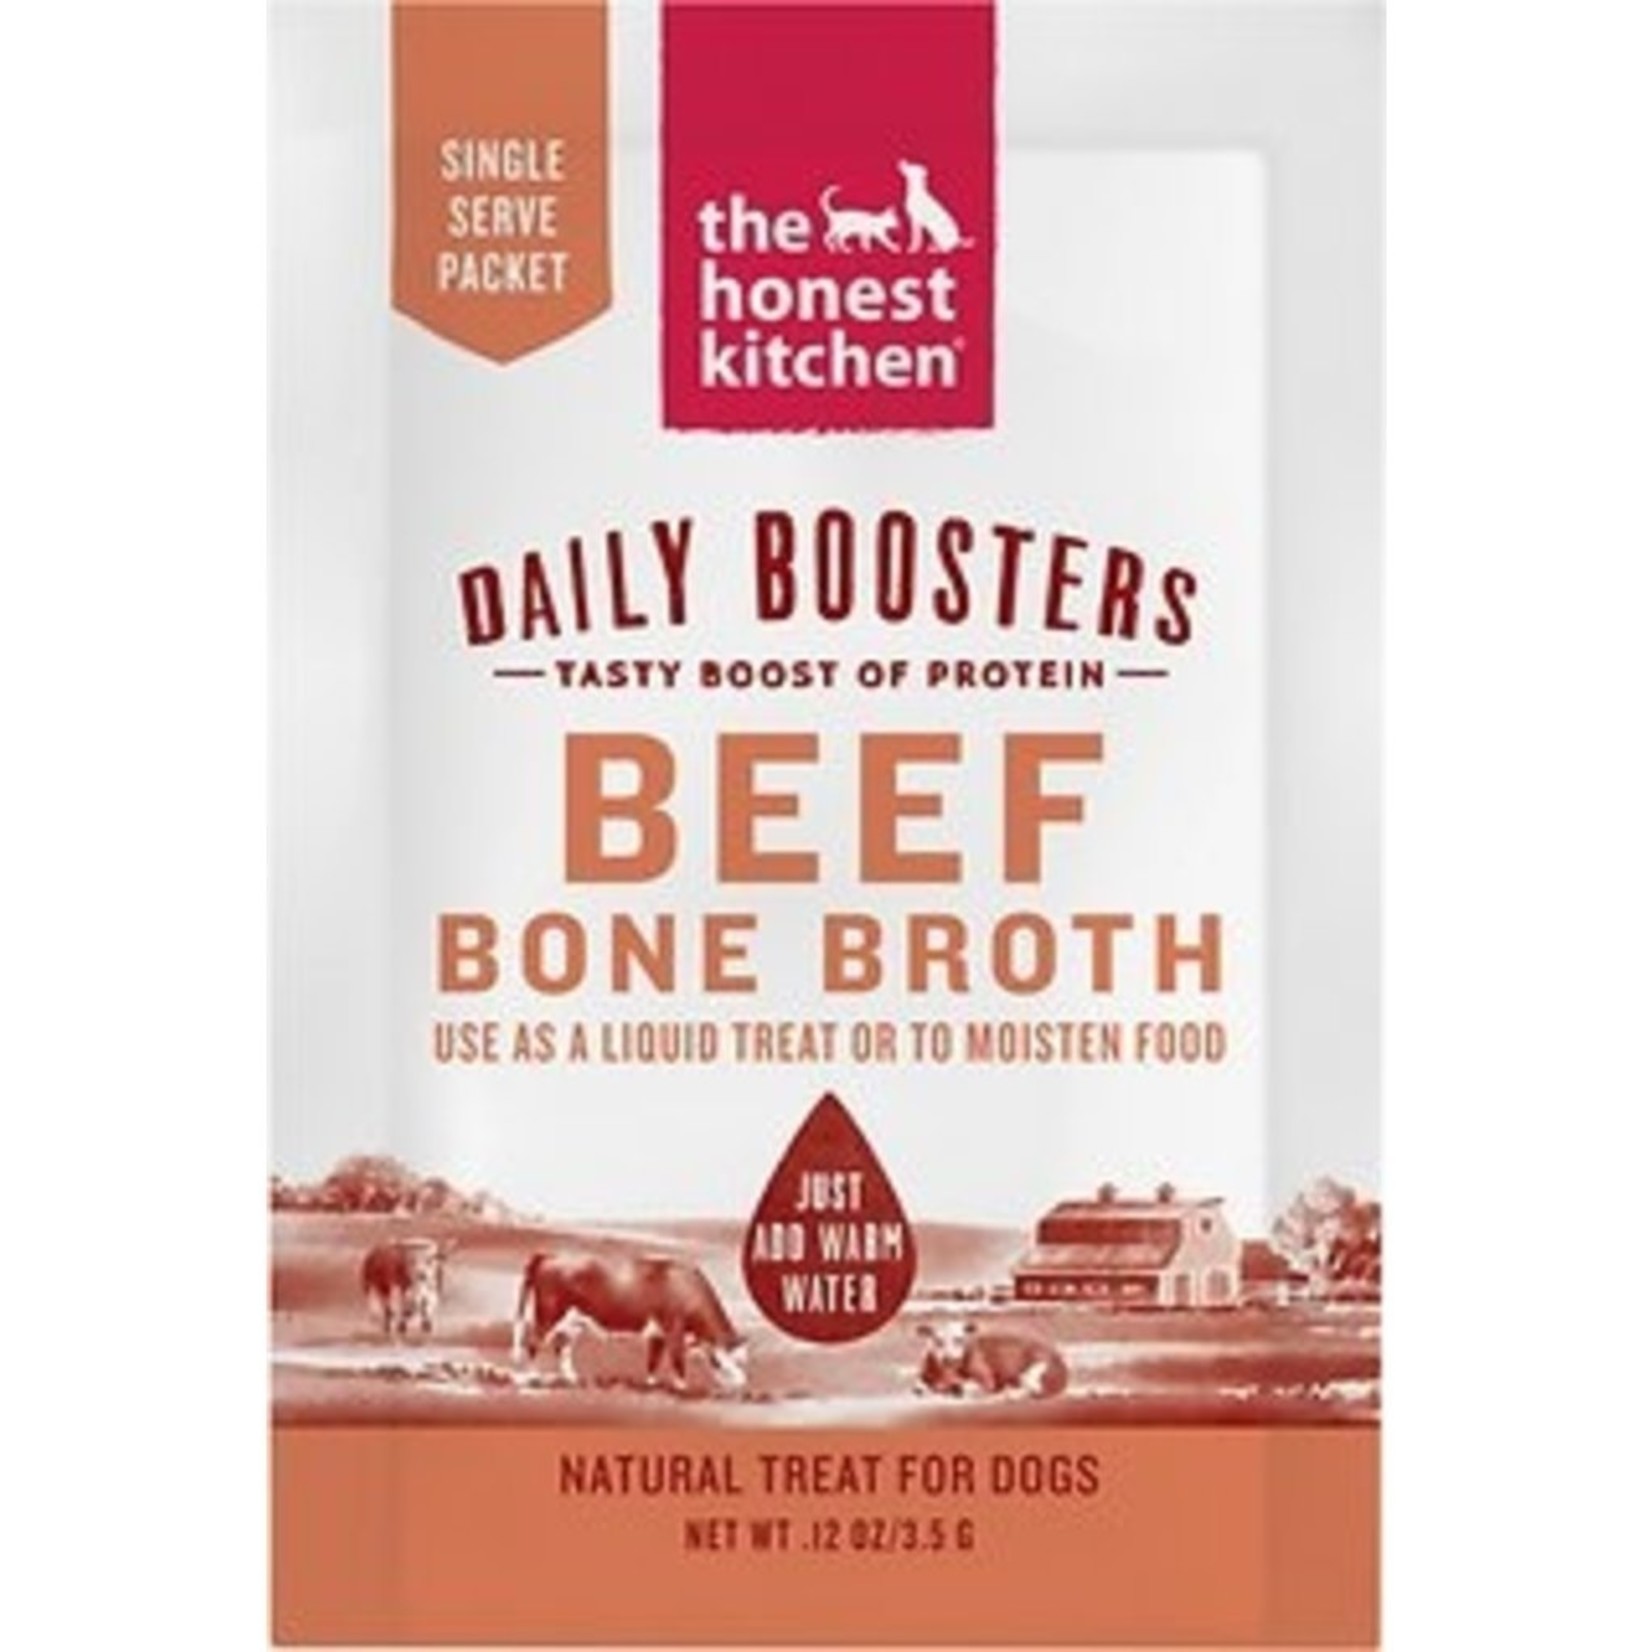 Honest Kitchen The Honest Kitchen Daily Boosters Instant Beef Bone Broth Dog 0.12oz Pouch